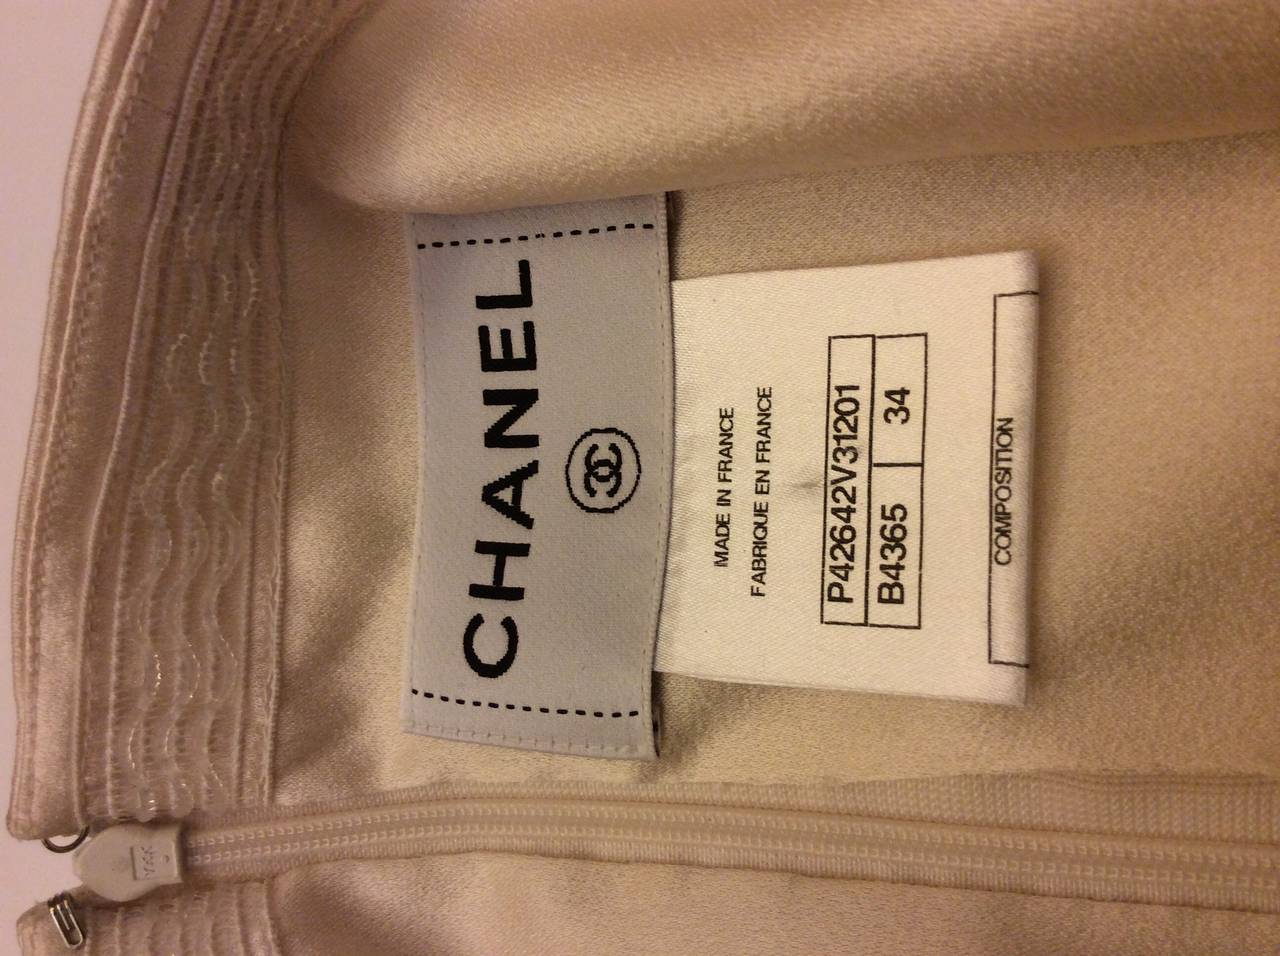 This is a lovely Chanel Silk halter dress
Size 34
Zip up back closure with logo CC zipper pull
Fully lined
Measurements:
Bust 30-32